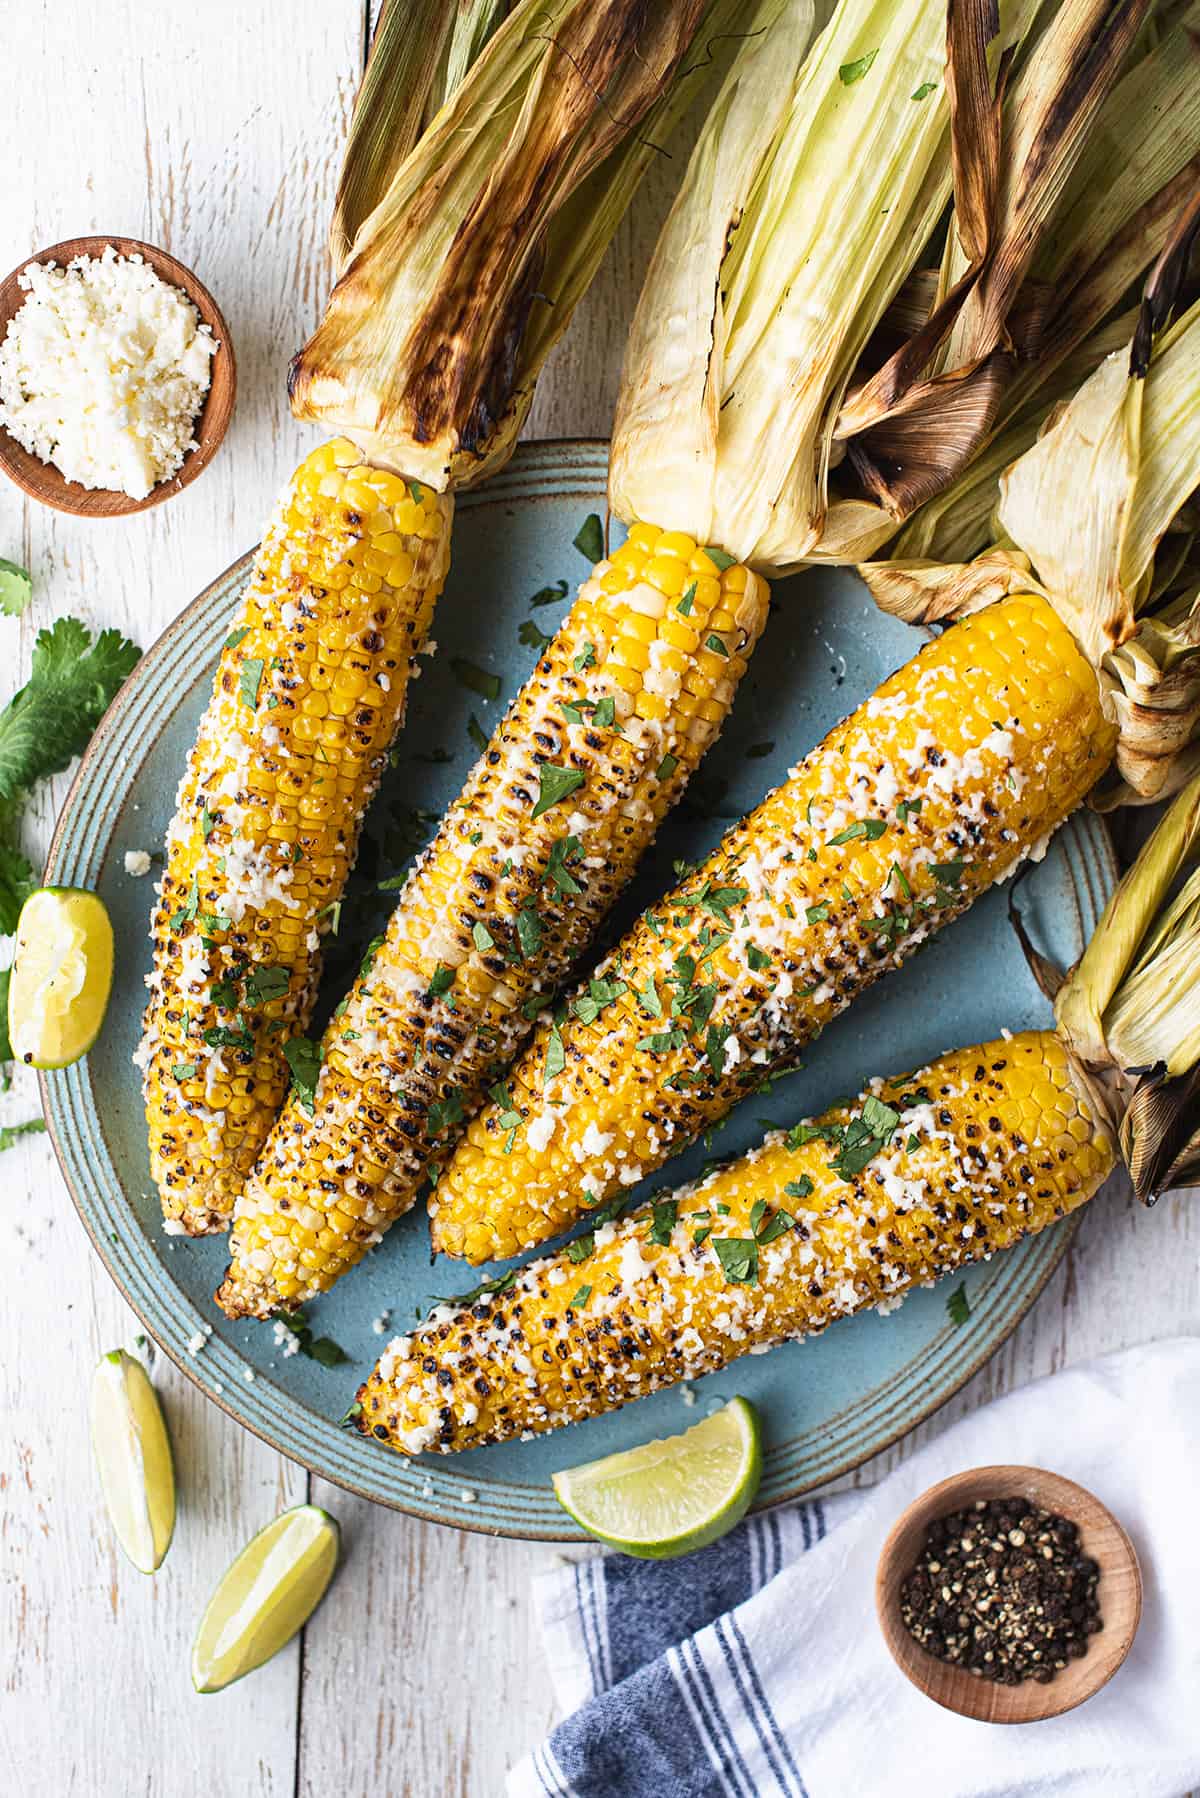 4 ears of grilled corn on the cob (Mexican Street Corn) with husks pulled back on blue plate